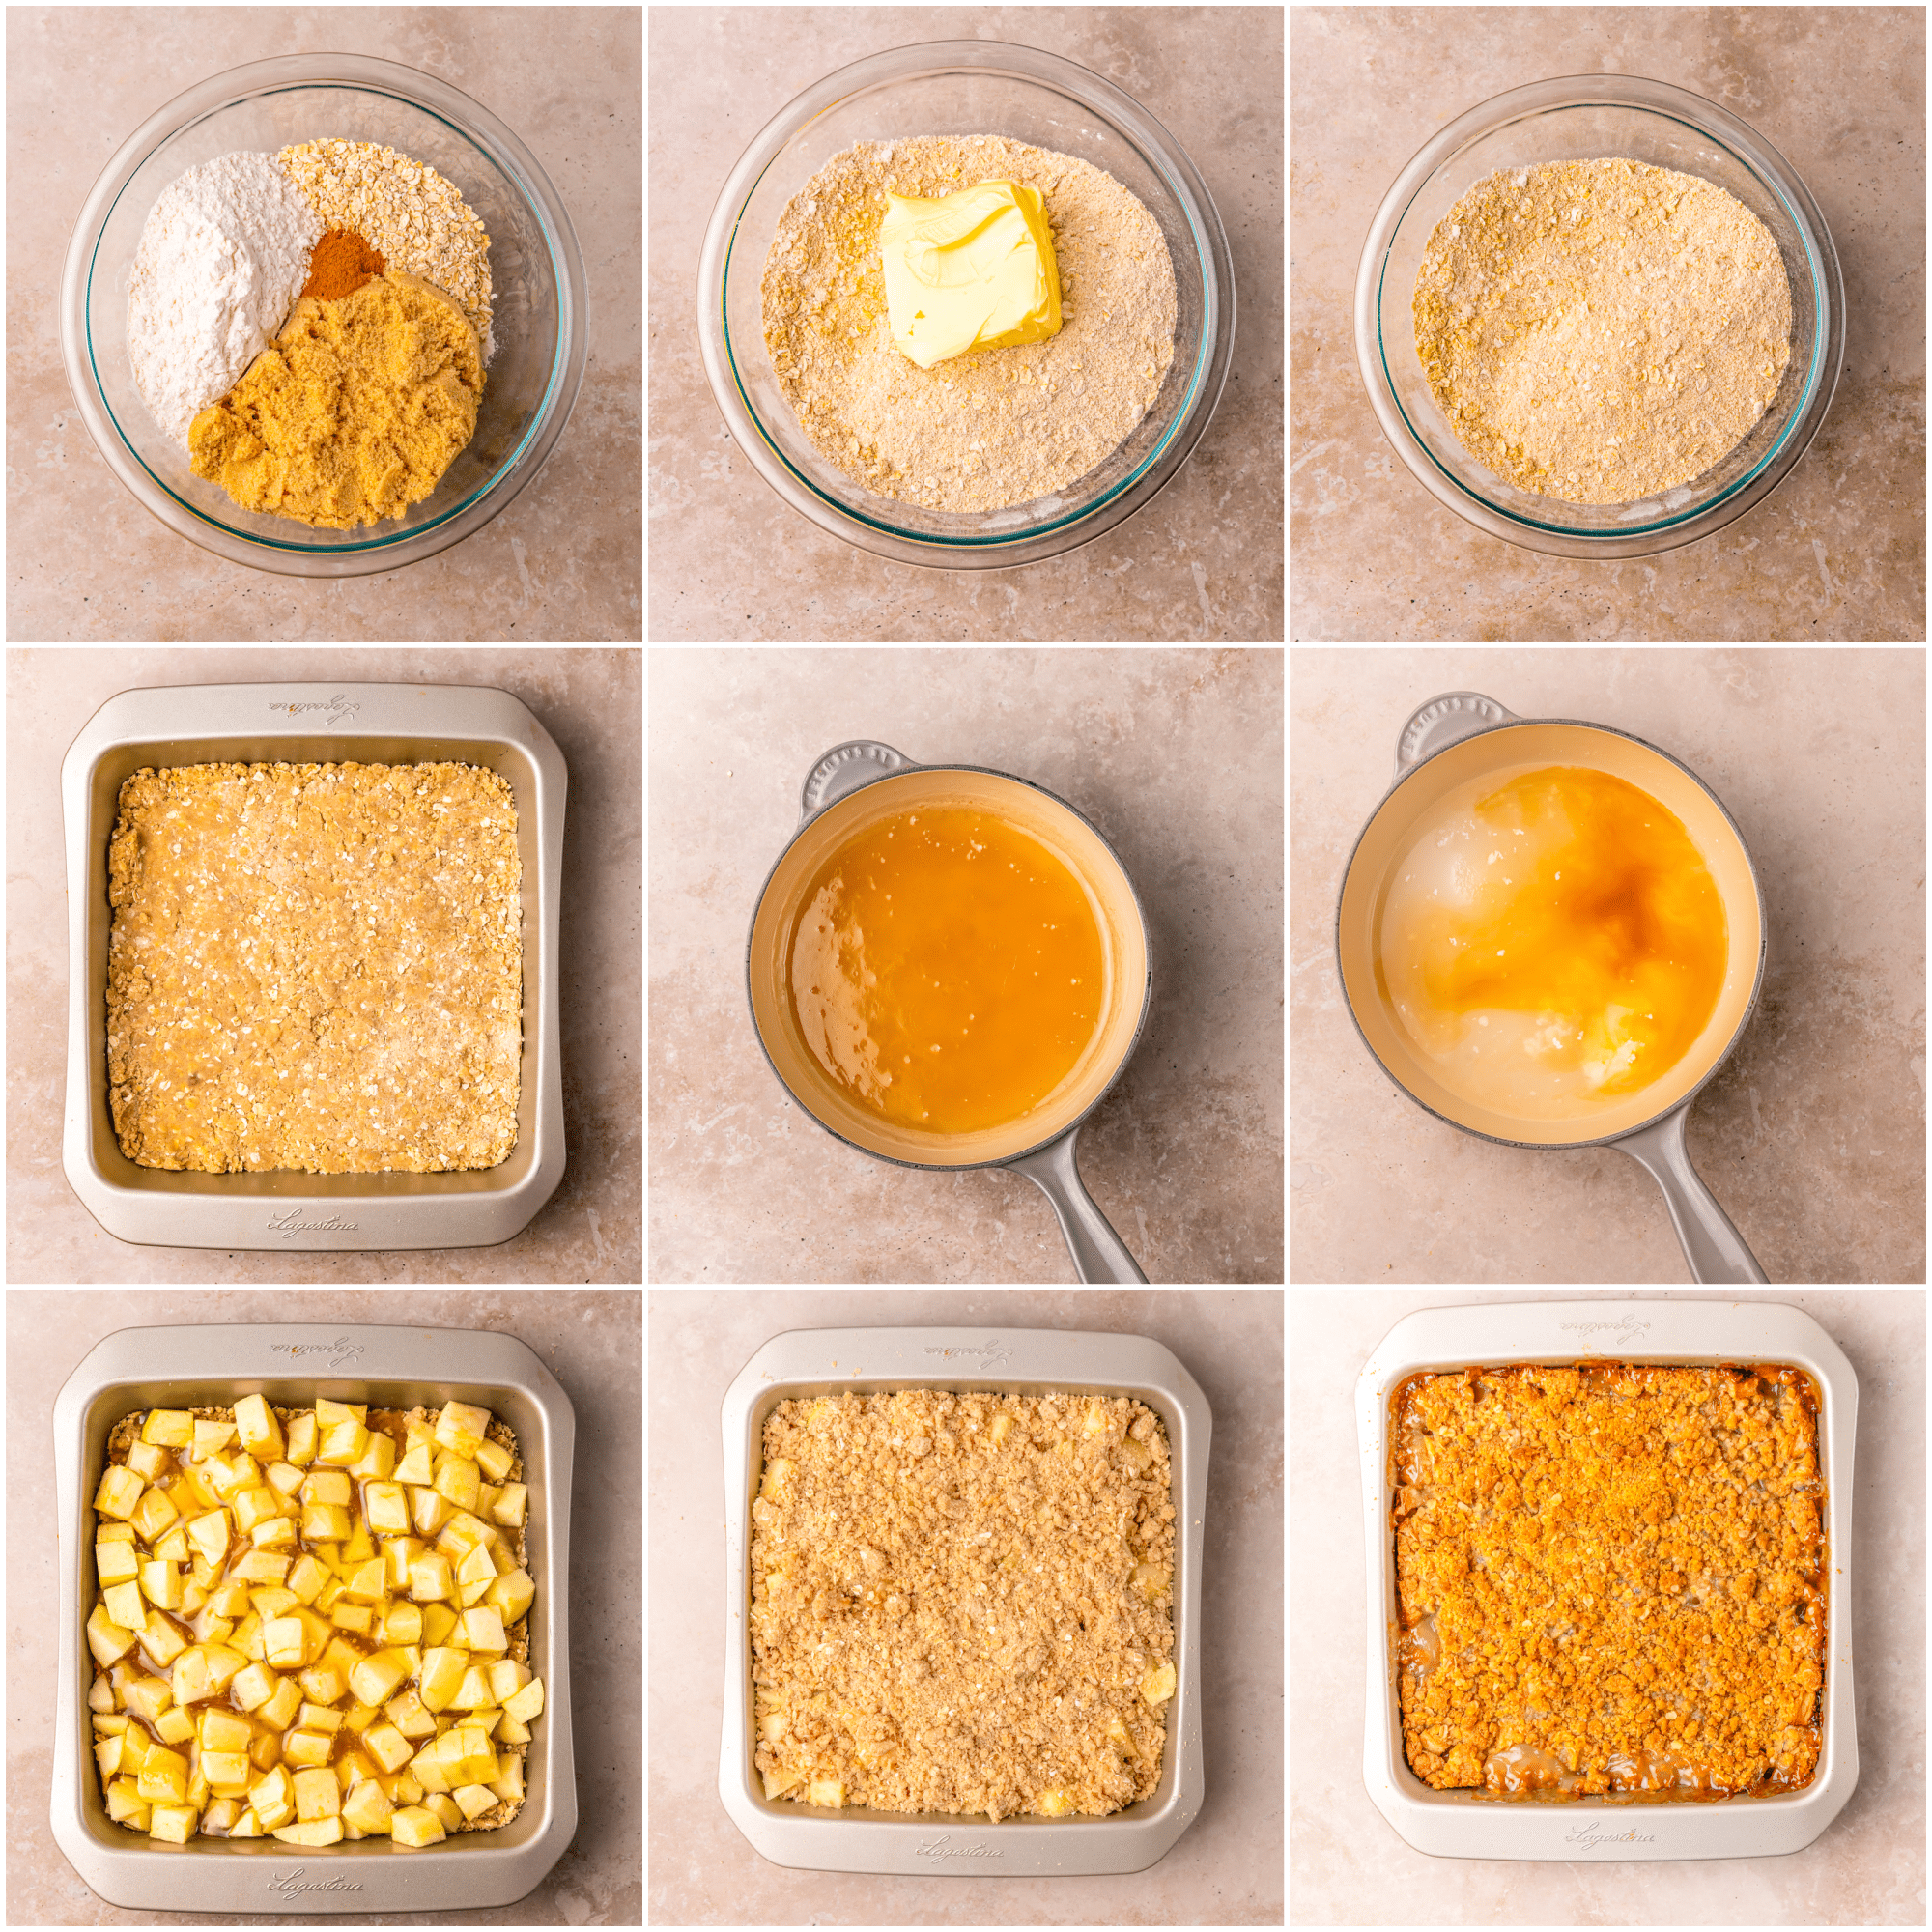 A collage image showing the steps necessary to make this Apple Crisp recipe.